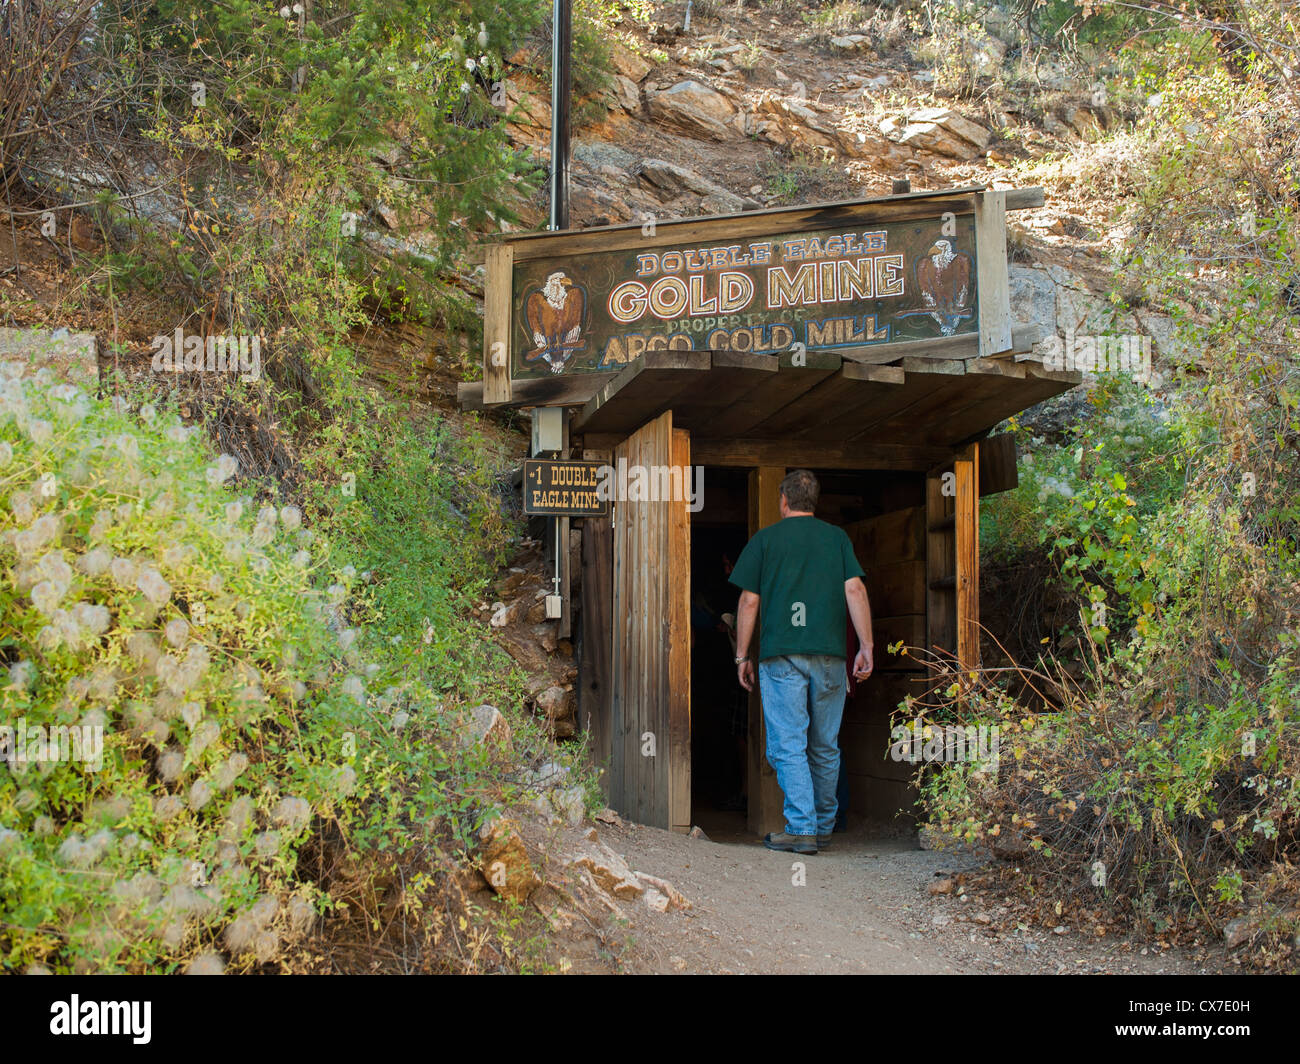 The Double Eagle mine is part of the tour of the historic Argo gold mill in Idaho Springs, Colorado Stock Photo